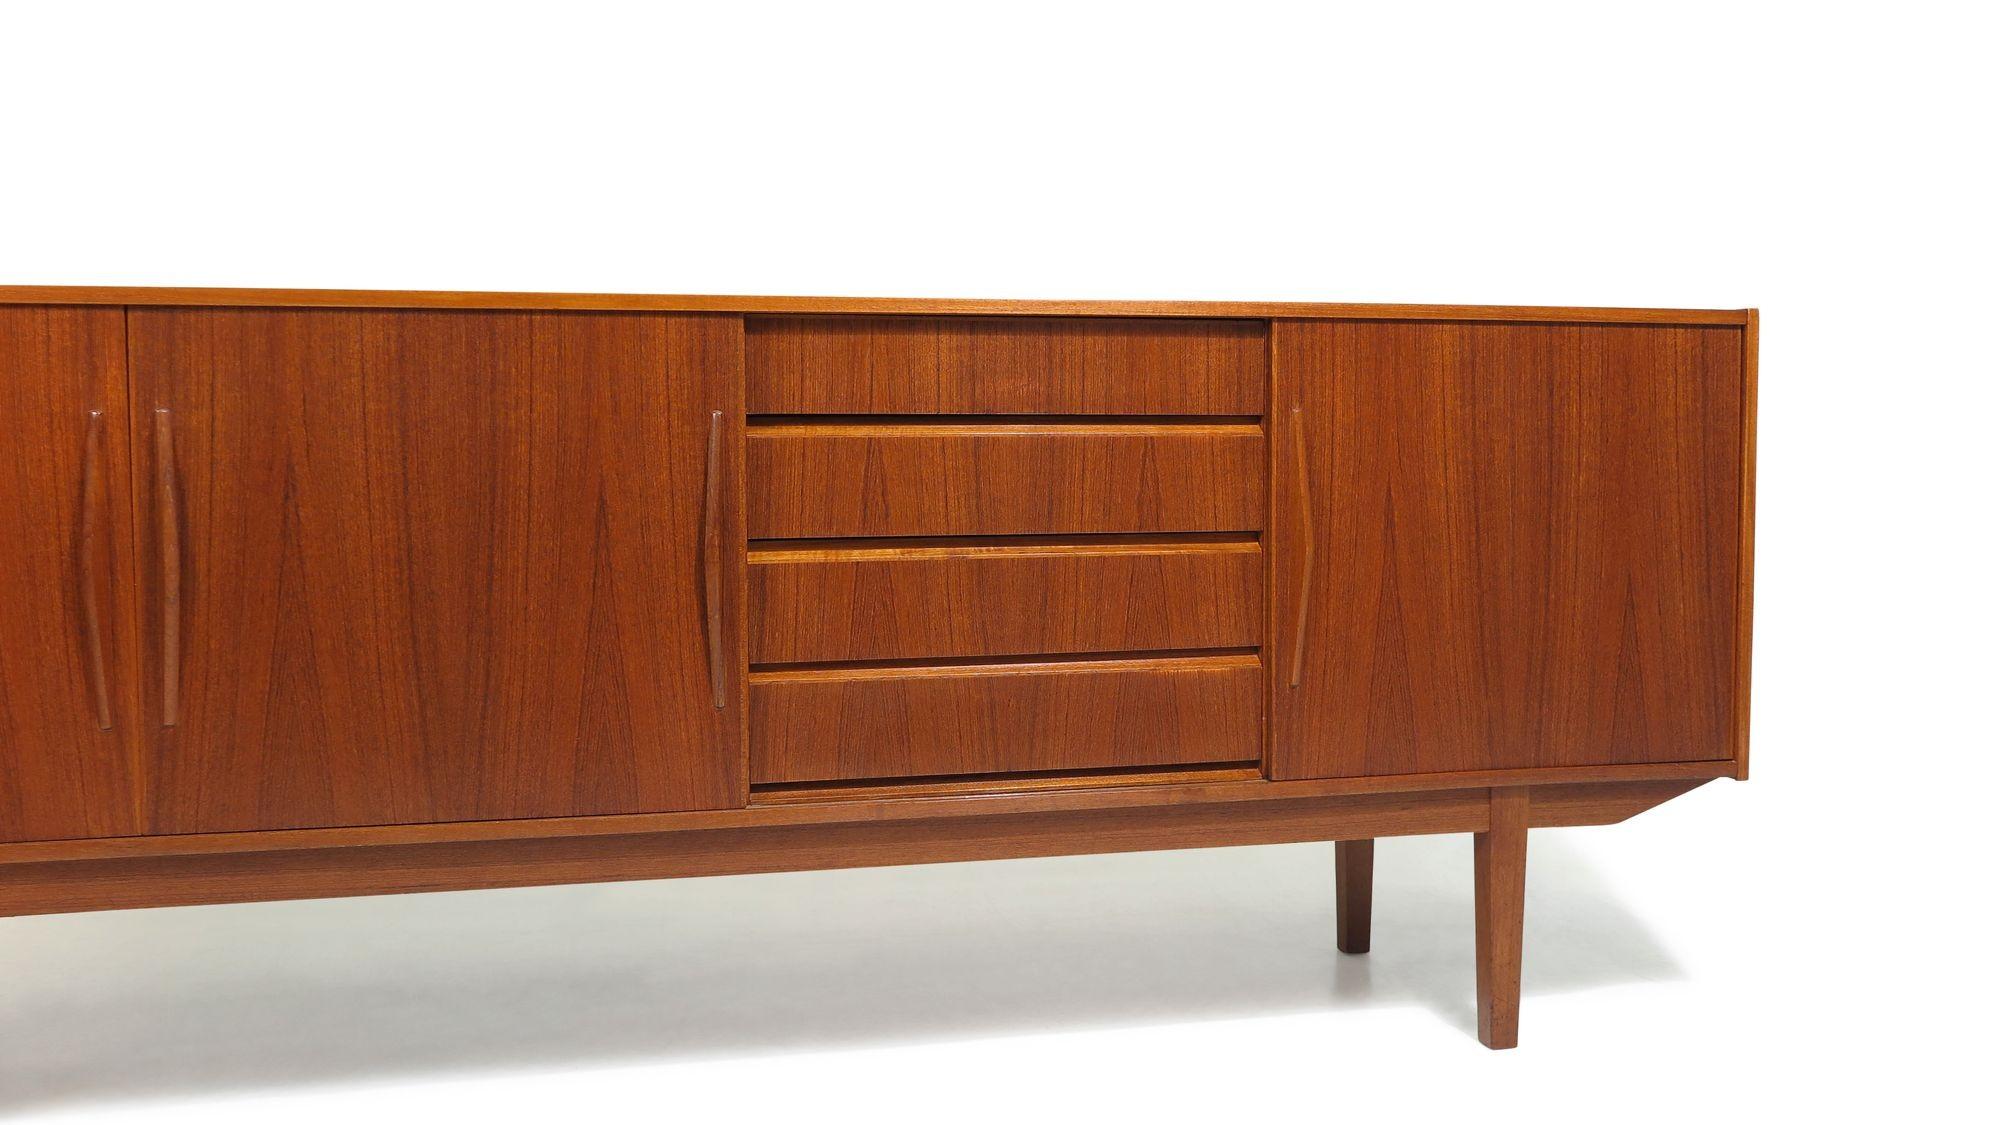 1960's Mid-century Danish Teak Credenza with Doors and Drawers For Sale 4